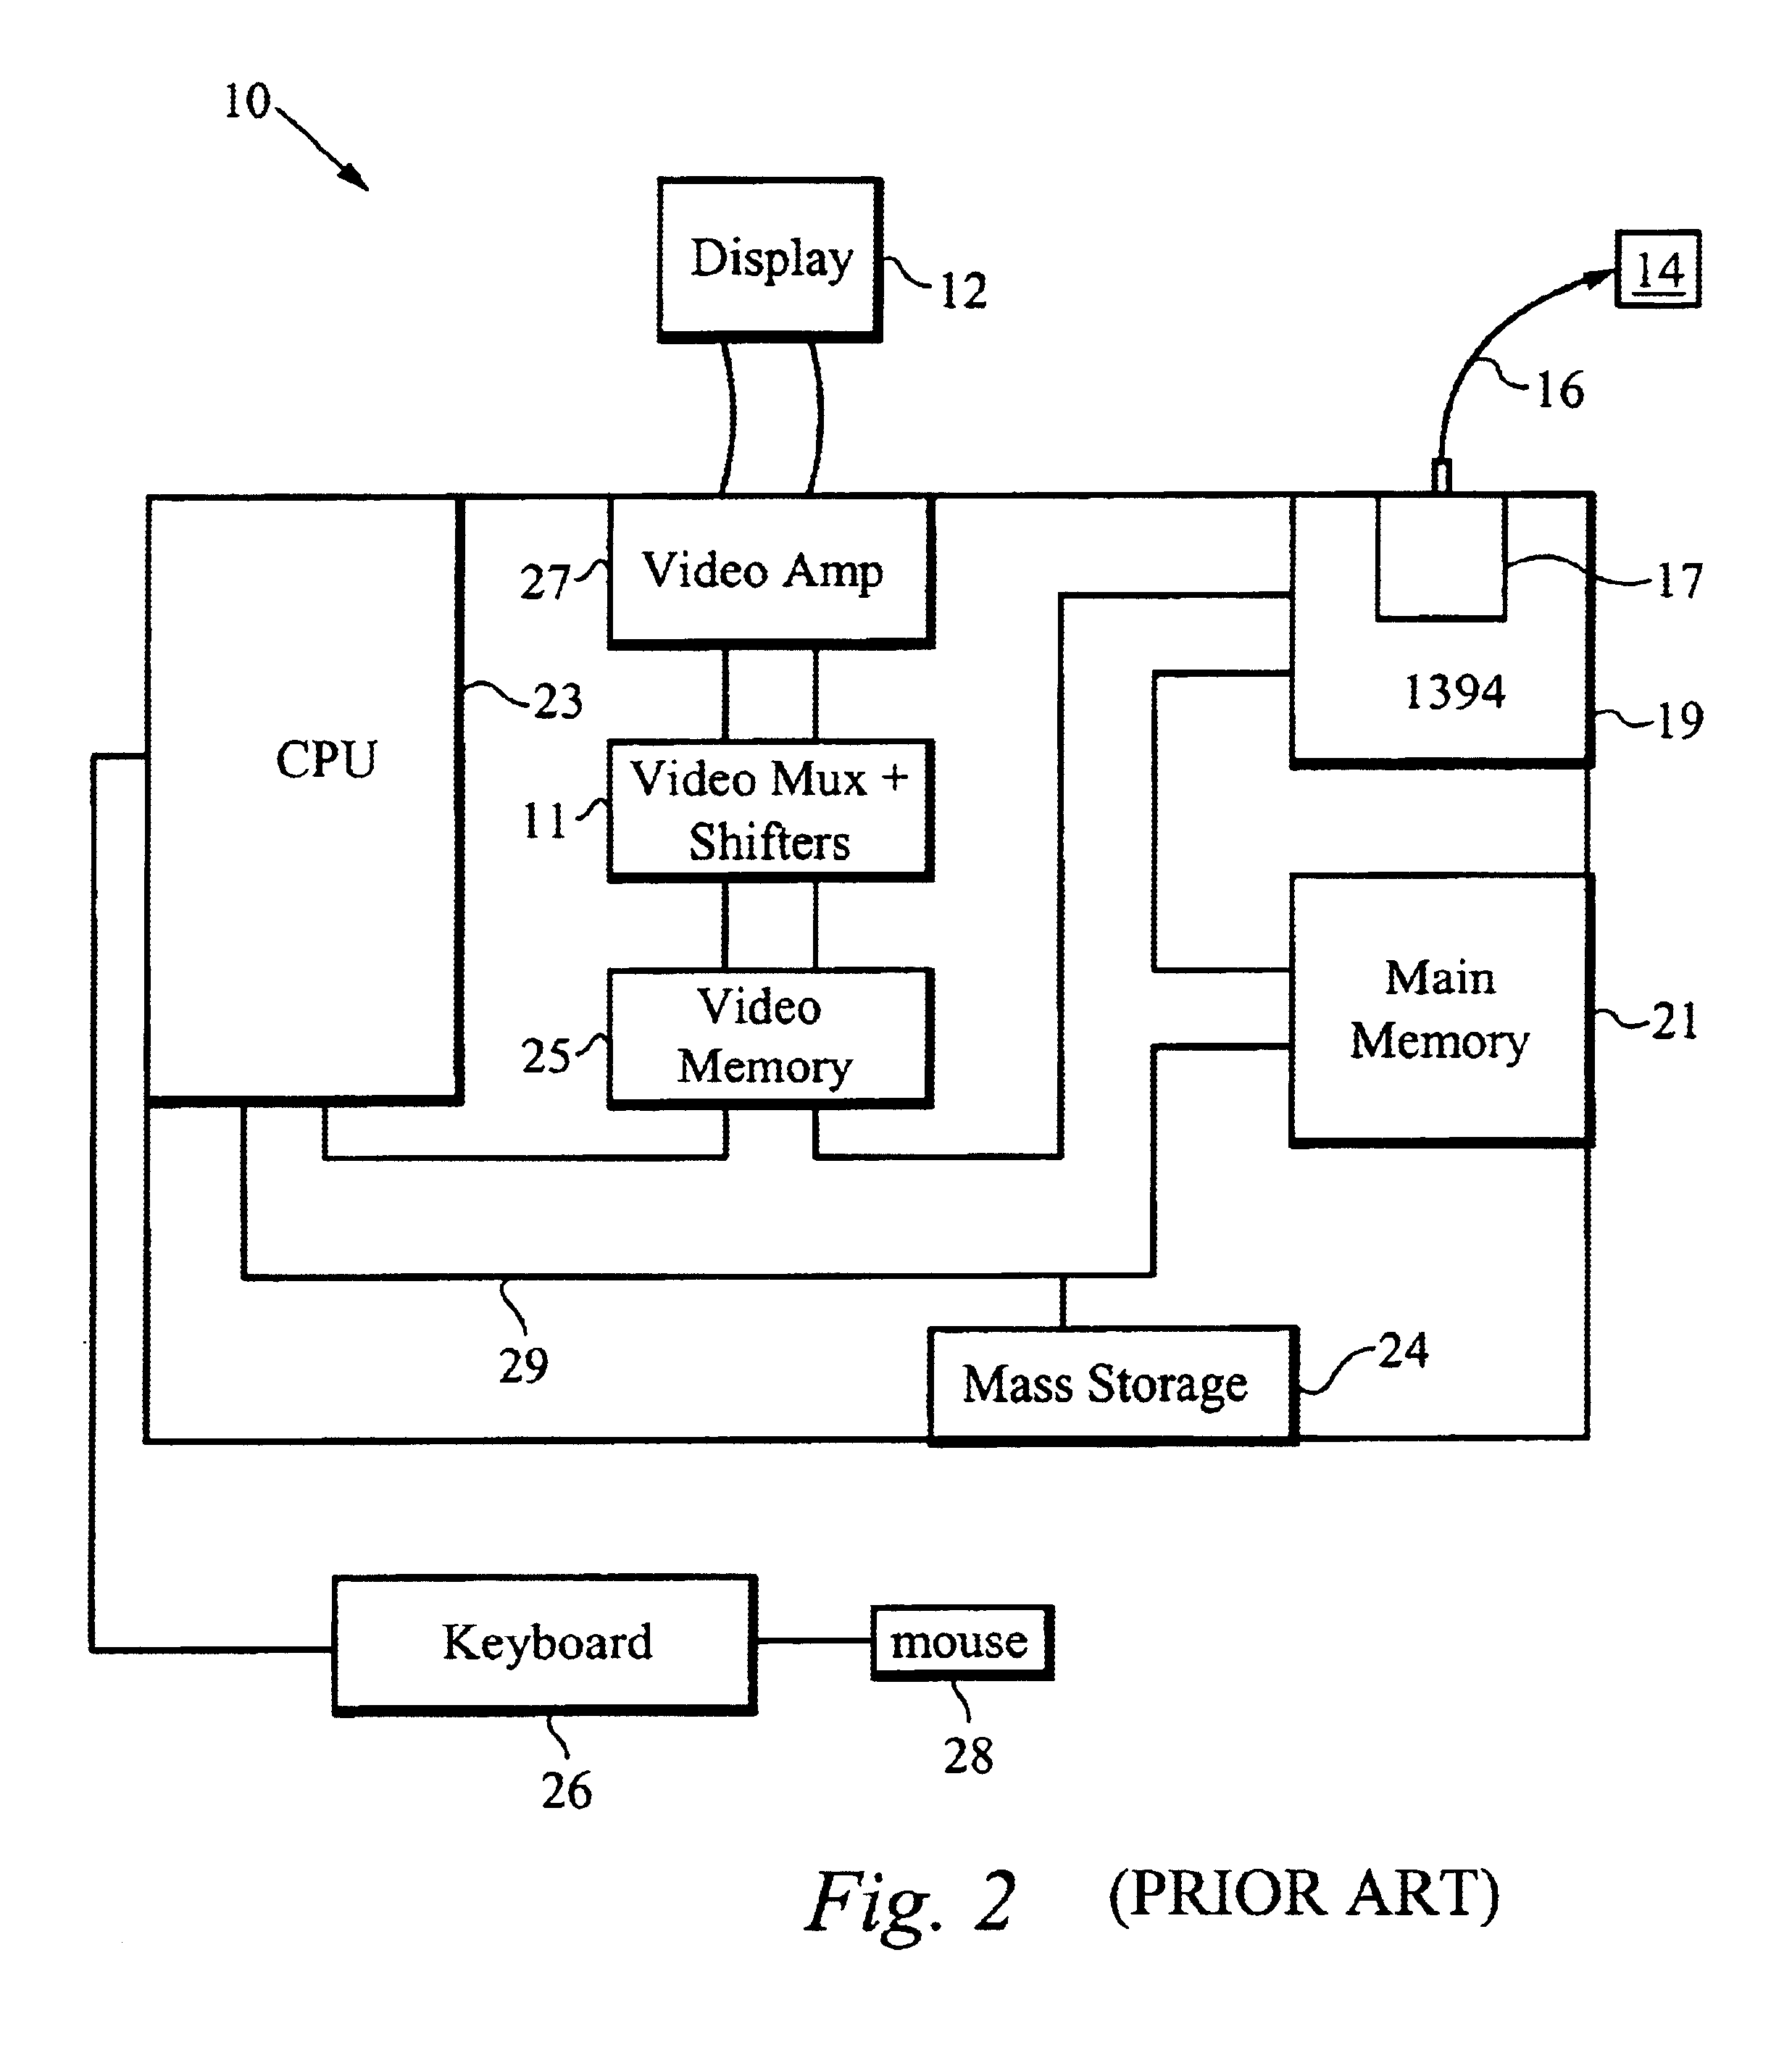 Method of and apparatus for communicating data structures between devices in a networking environment